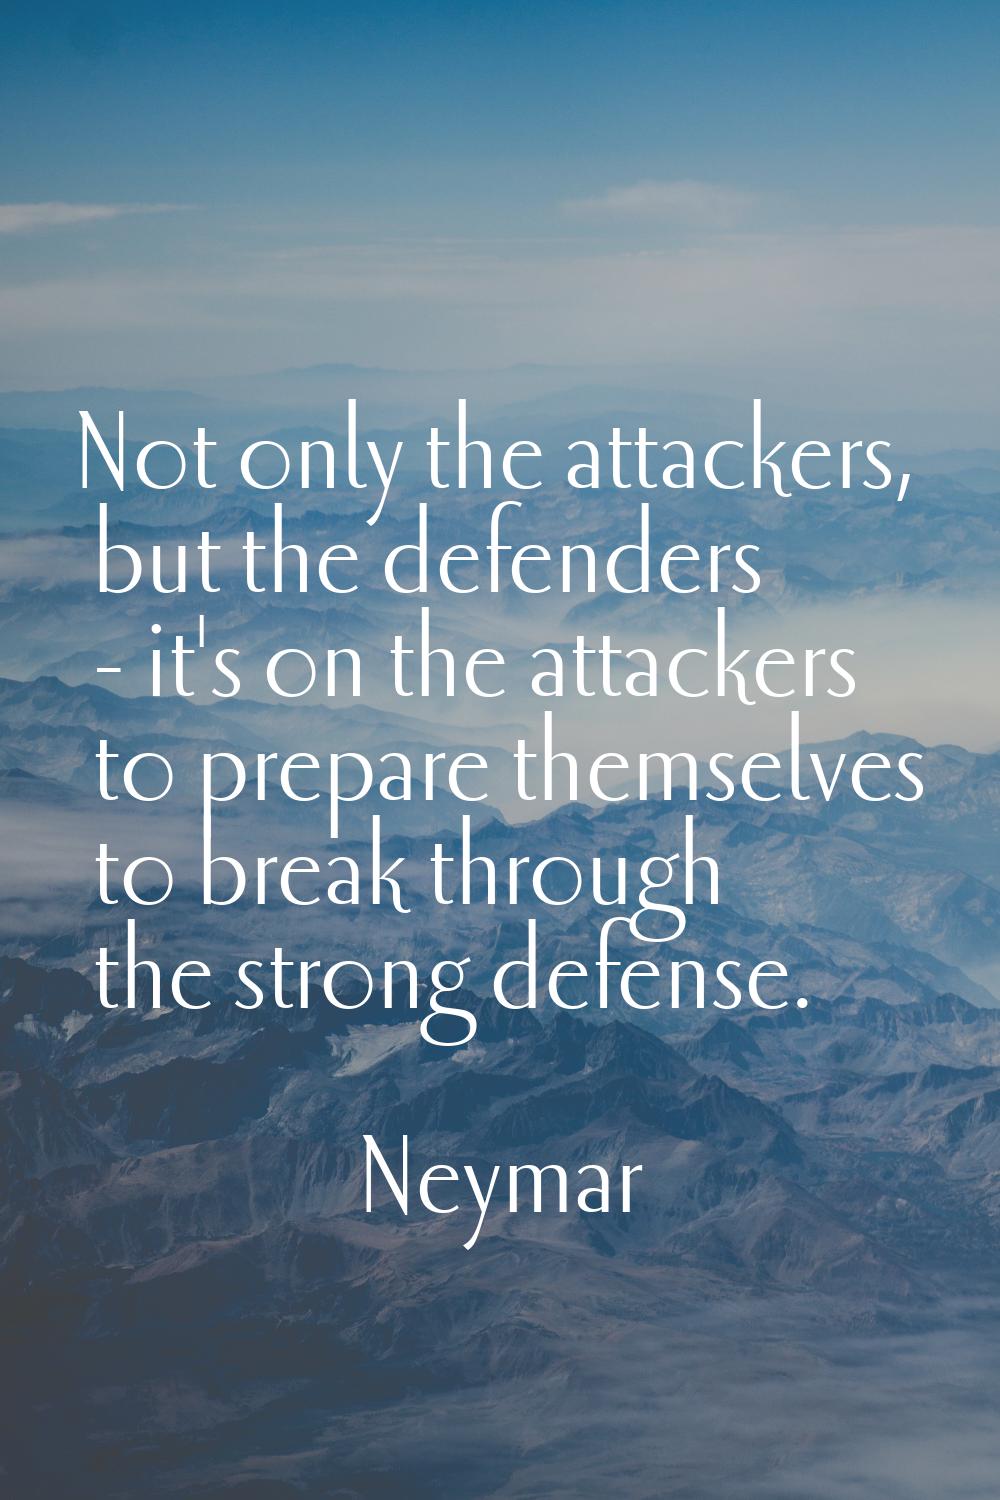 Not only the attackers, but the defenders - it's on the attackers to prepare themselves to break th